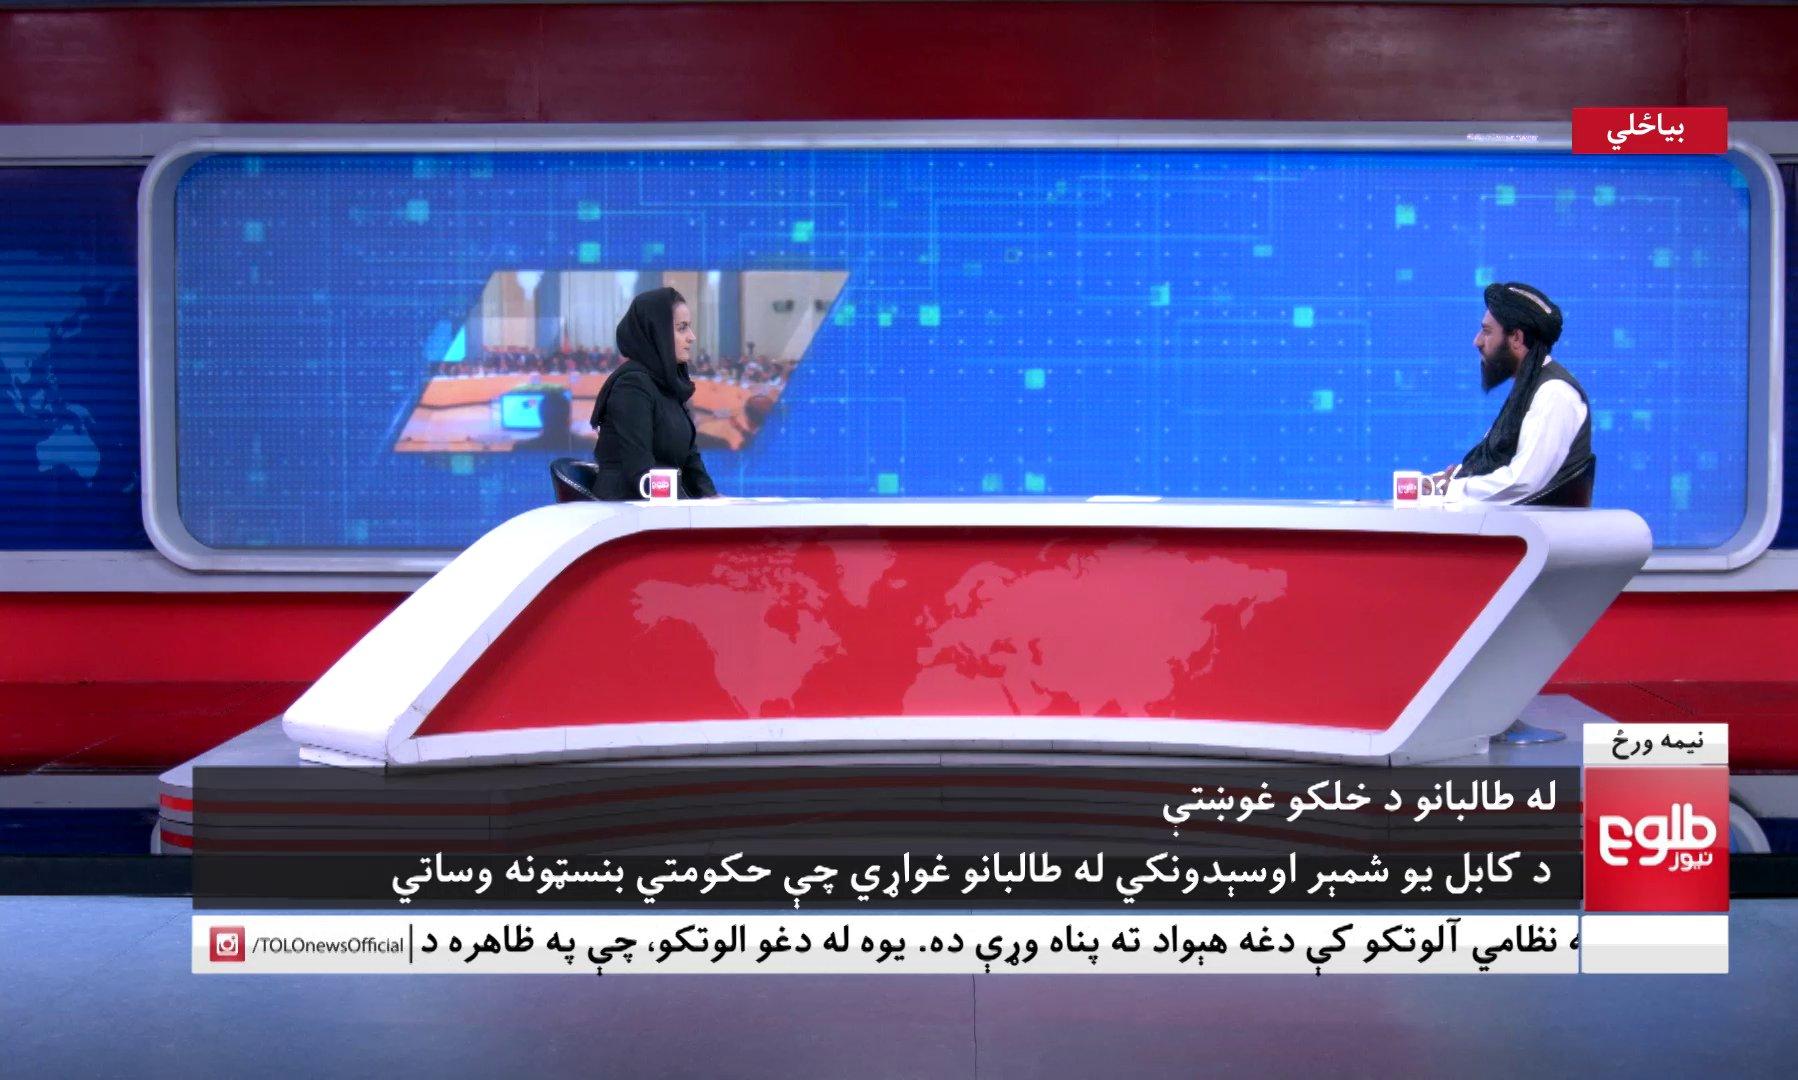 TOLO News female television anchor interviews a Taliban official on camera